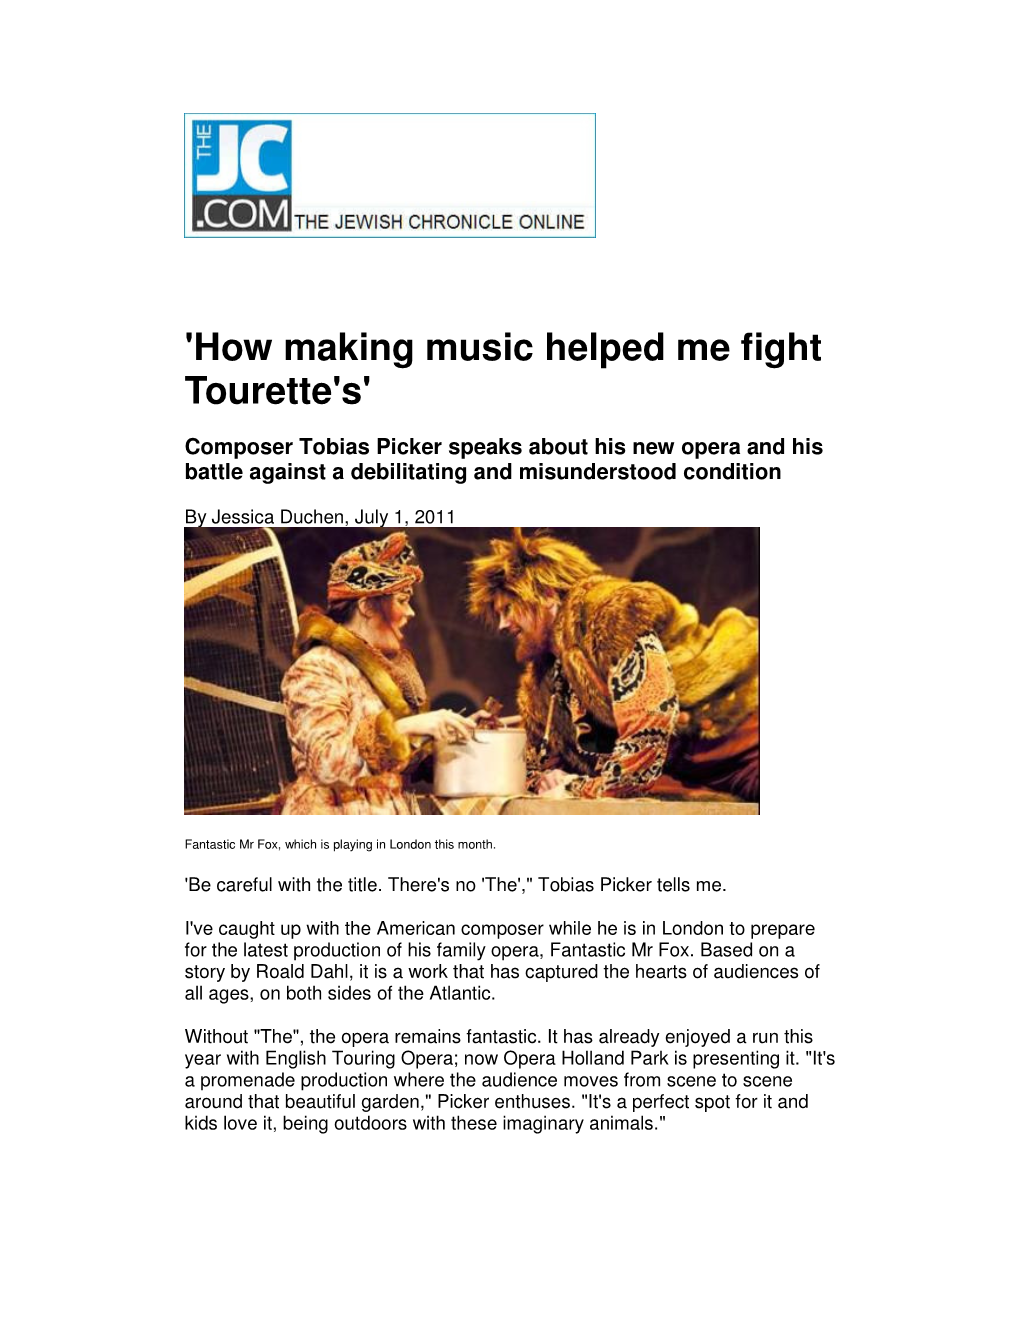 'How Making Music Helped Me Fight Tourette's'